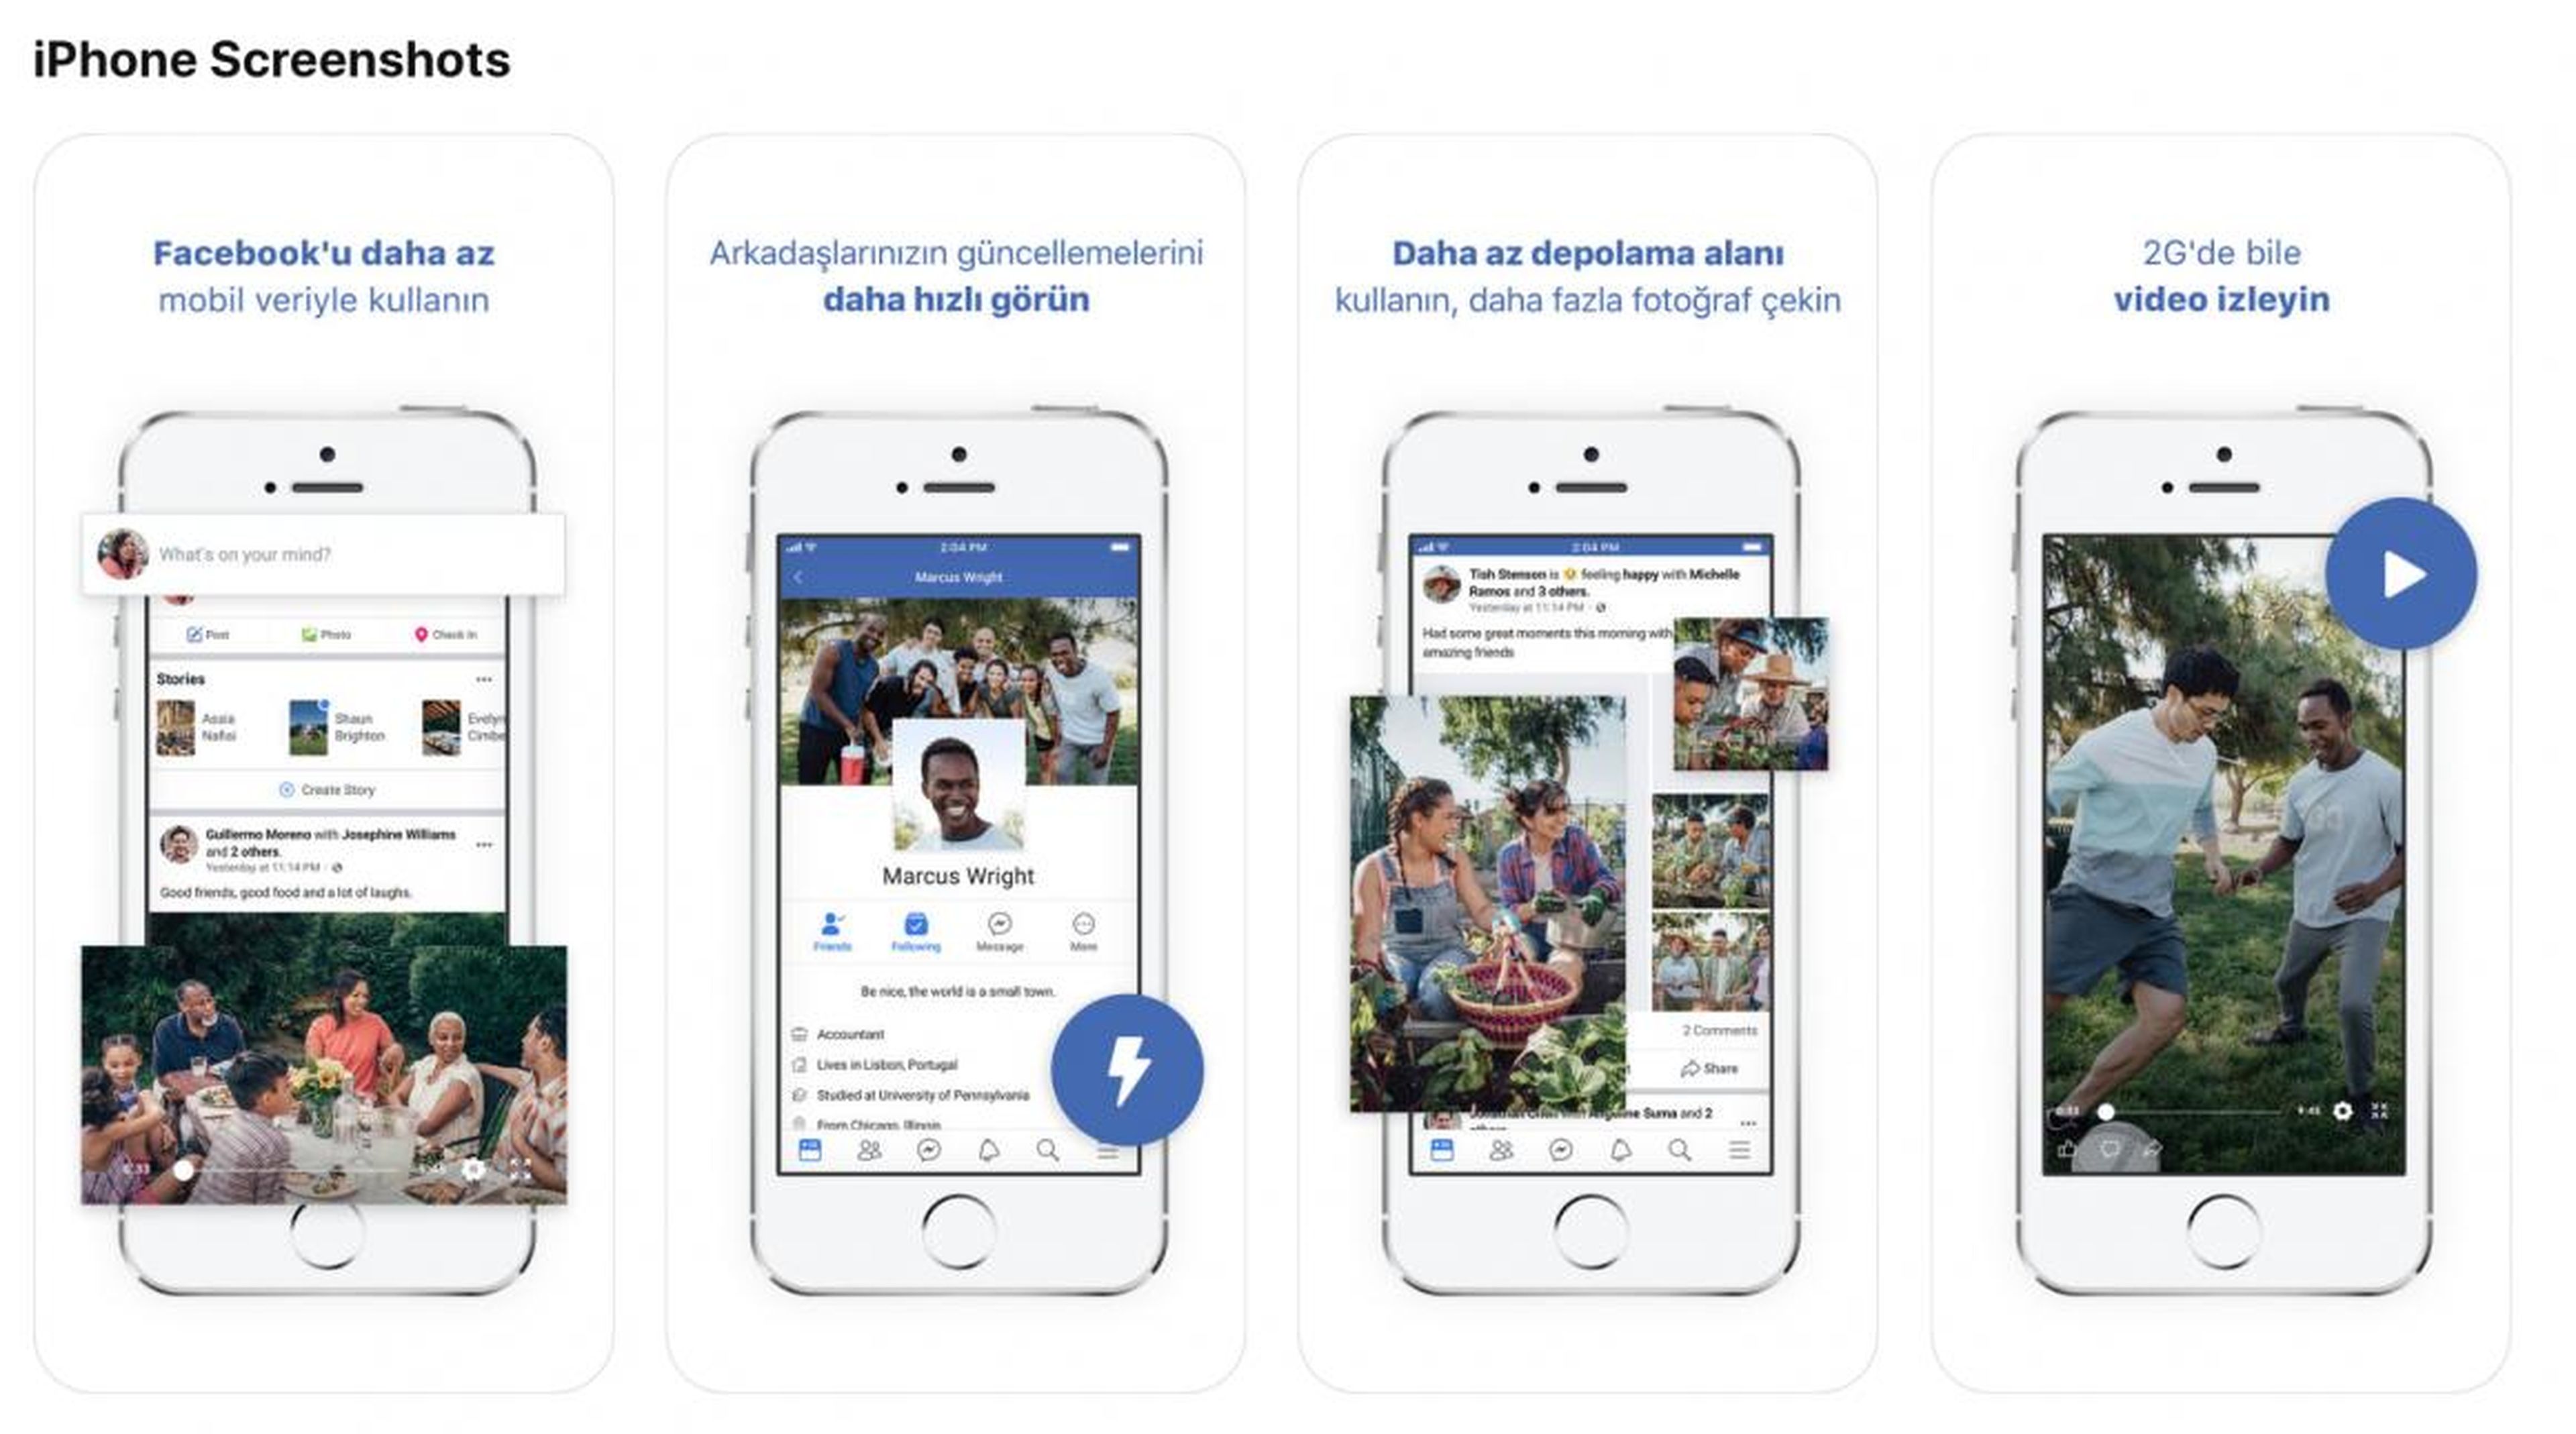 Facebook just launched a 'lite' version of its app for iPhones — but you probably can't download it yet